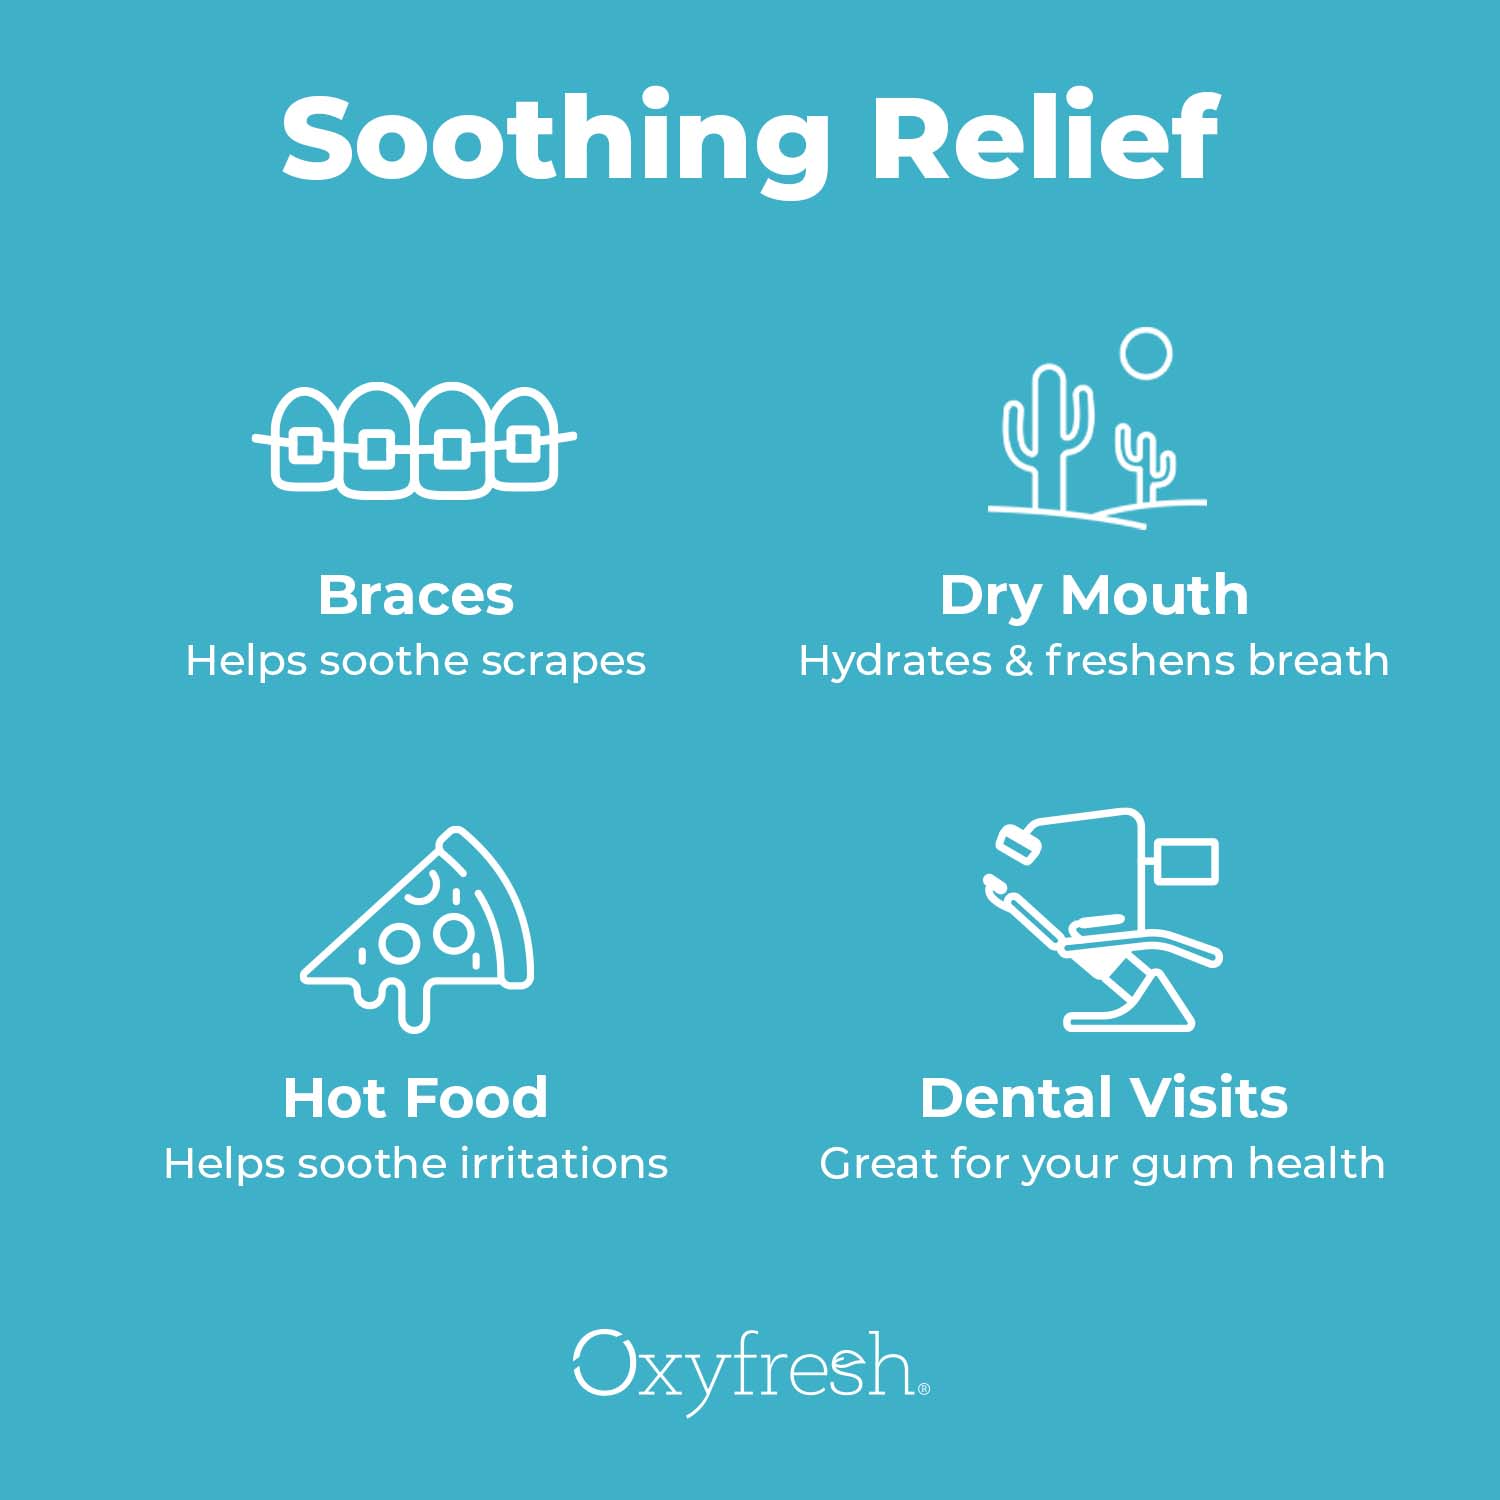 oxyfresh-pro-relief-oral-gel-provides-soothing-relief-for-those-with-braces-dry-mouth-hot-food-and-dental-visits